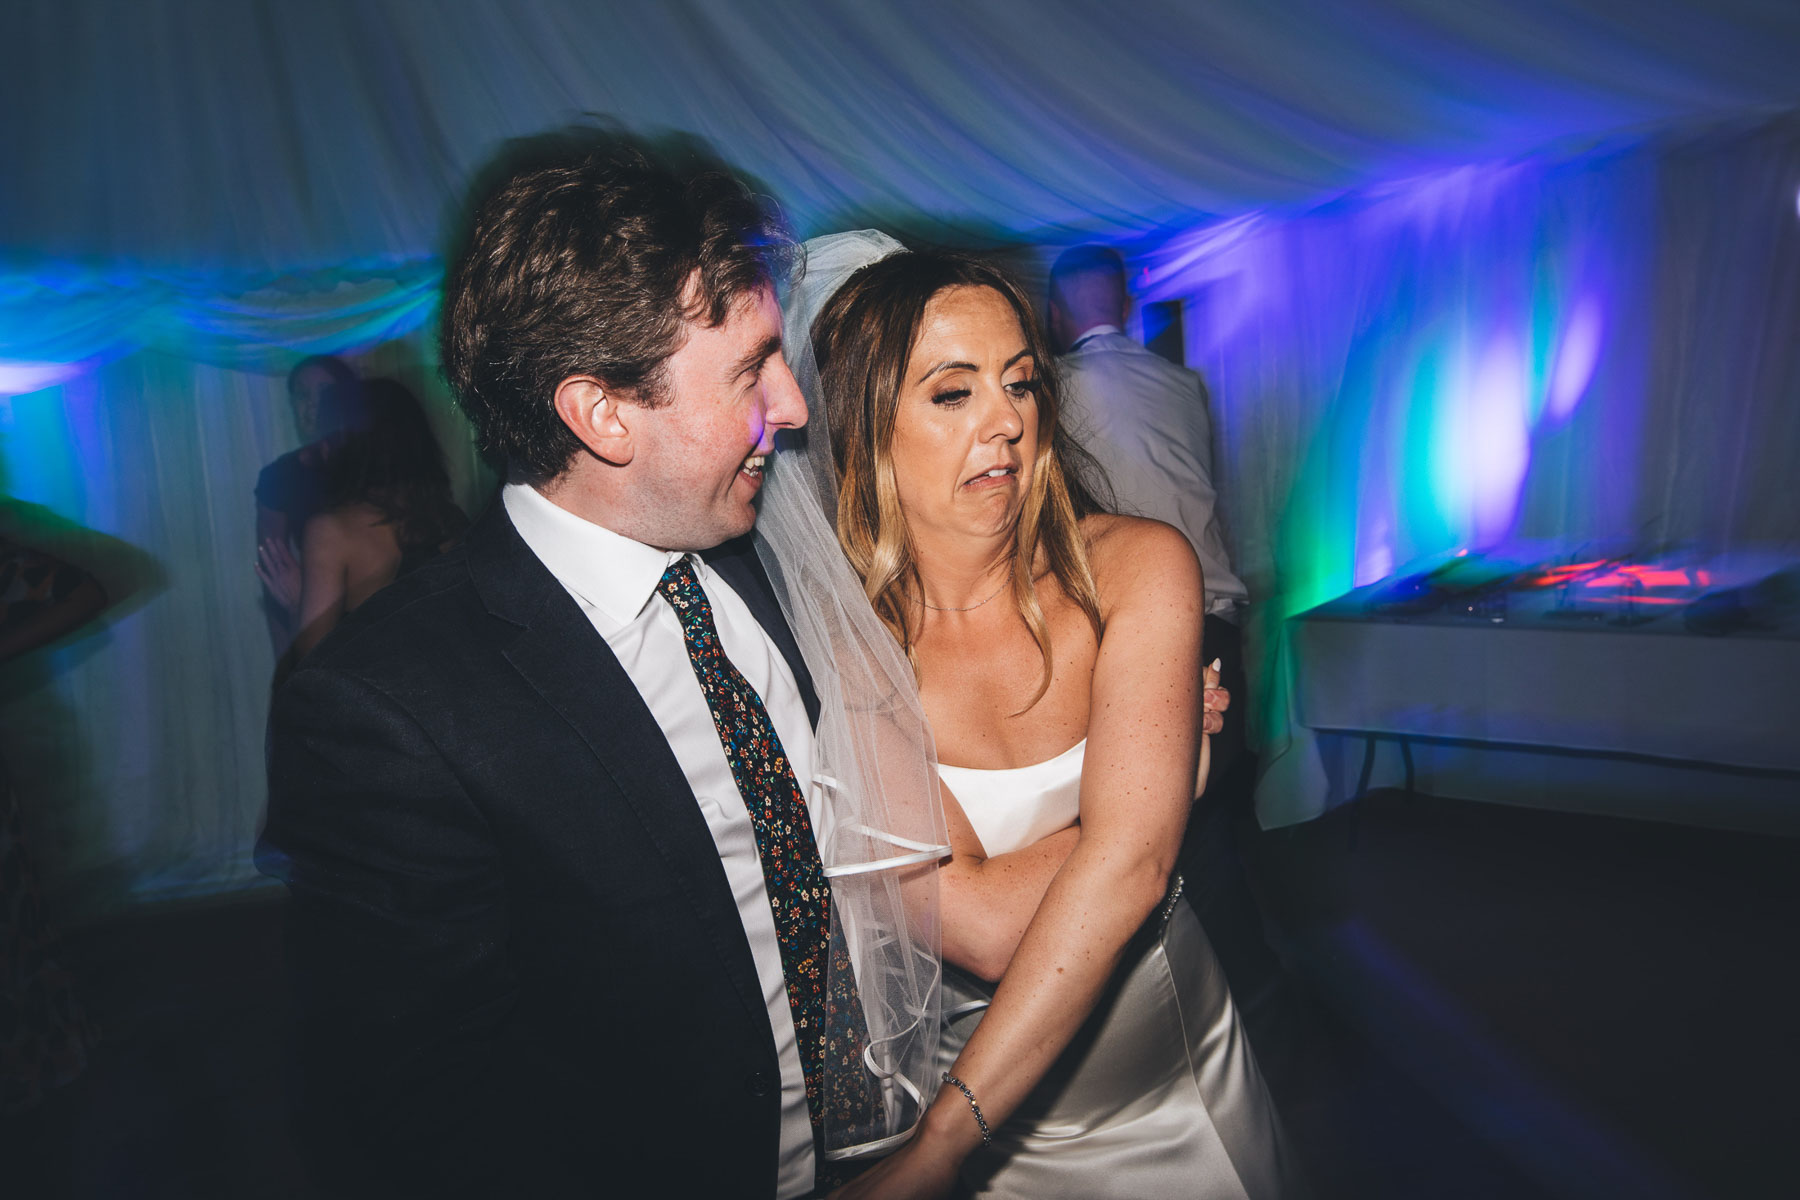 bride reaches over to guest inappropriately